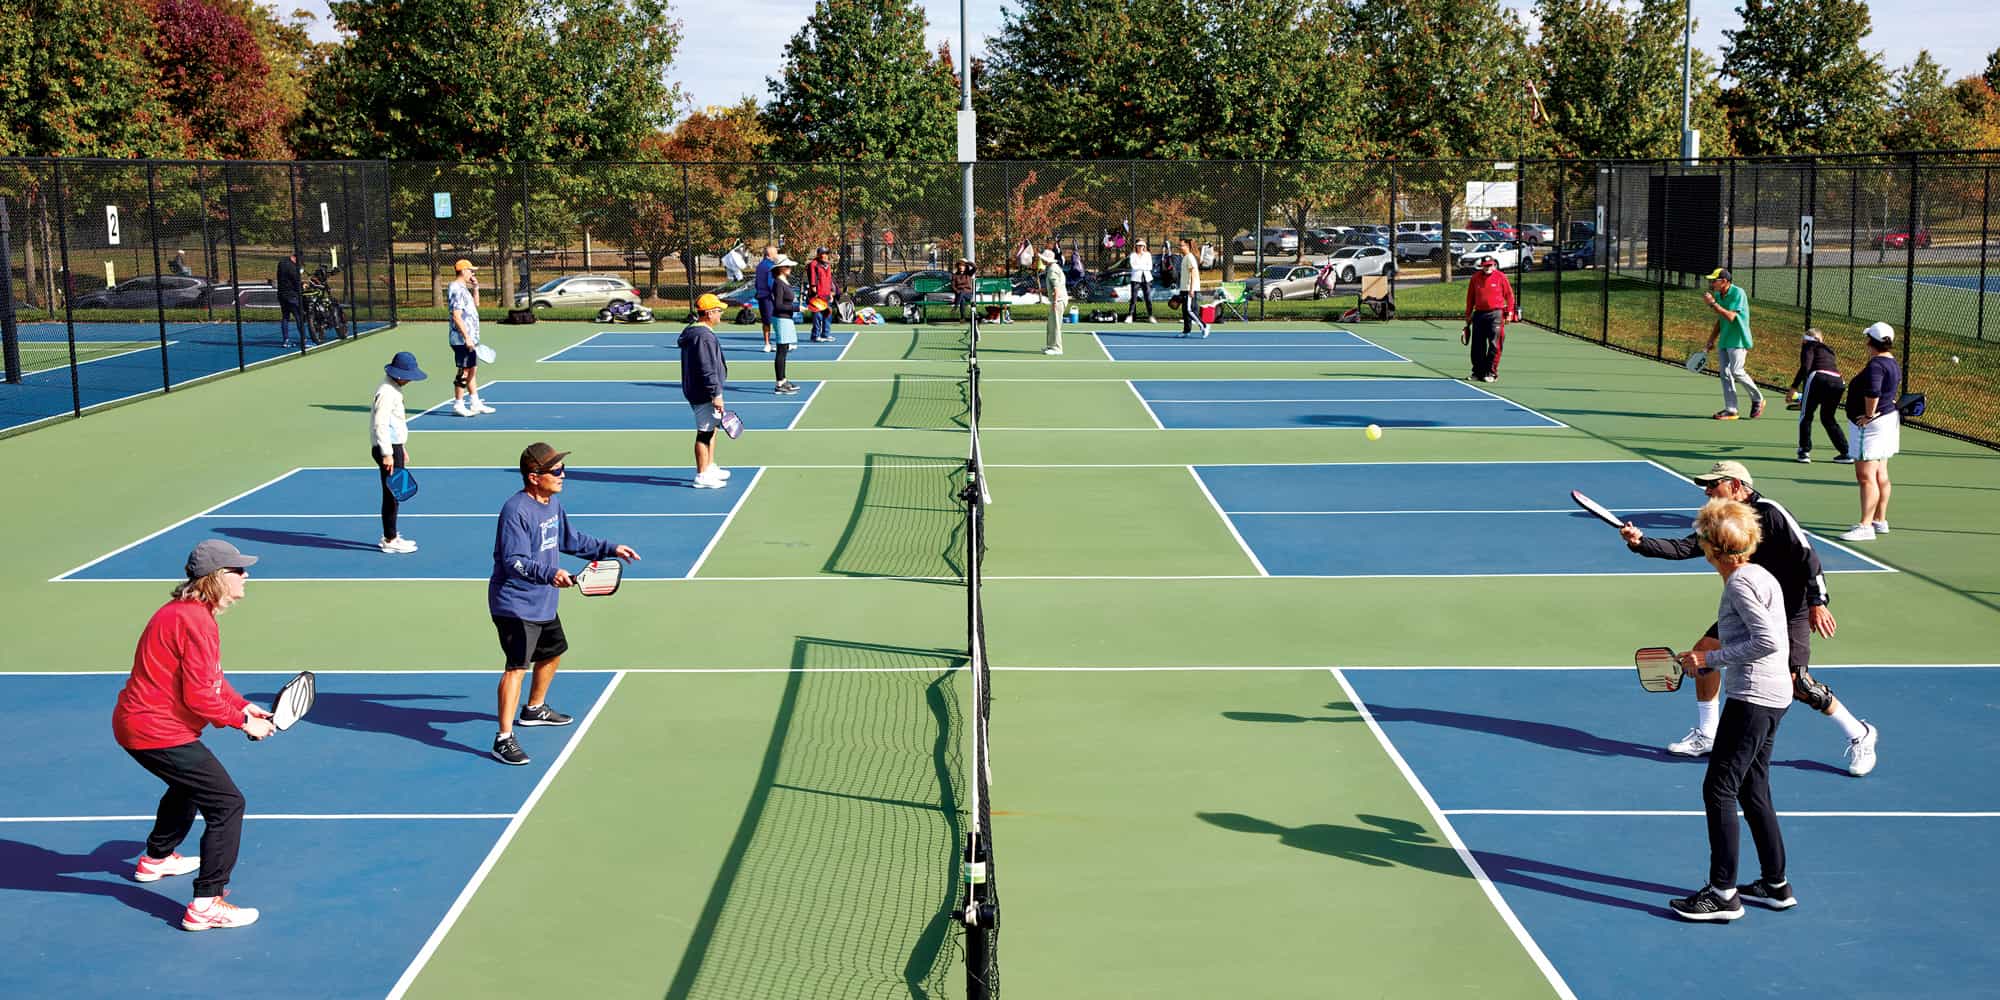 Difference between tennis and pickleball